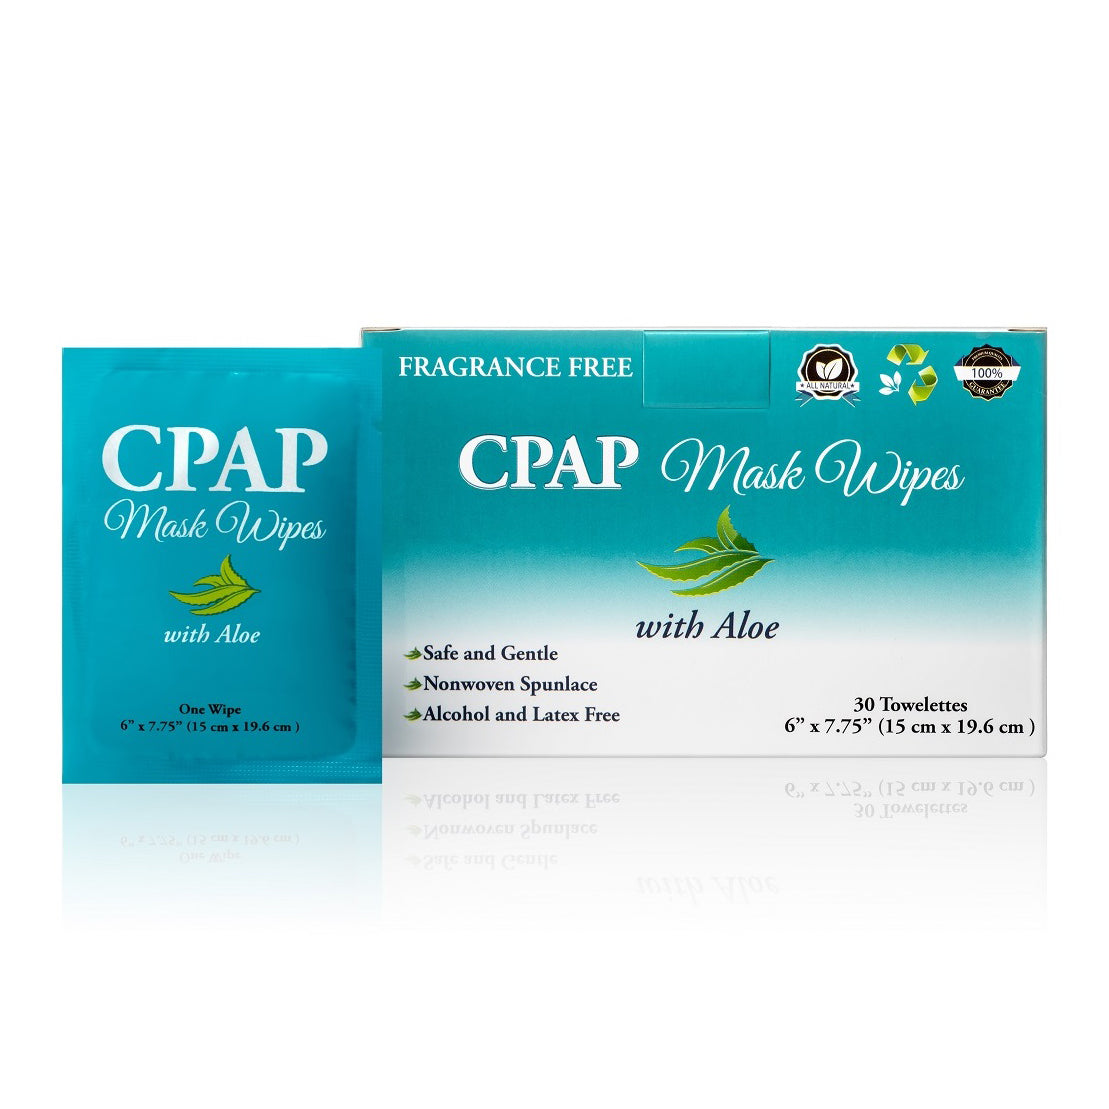 3B Medical CPAP Travel Wipes 100 percent pure cotton wipe are specially designed to naturally clean and protect your mask without harmful chemicals. CPAP Mask Wipe efficiently removes dirt, grease, oils, and other residues from the patient's mask, keeping it fresh and clean. Wipes are made from 100% natural ingredients and contain no strong or unpleasant fragrances.